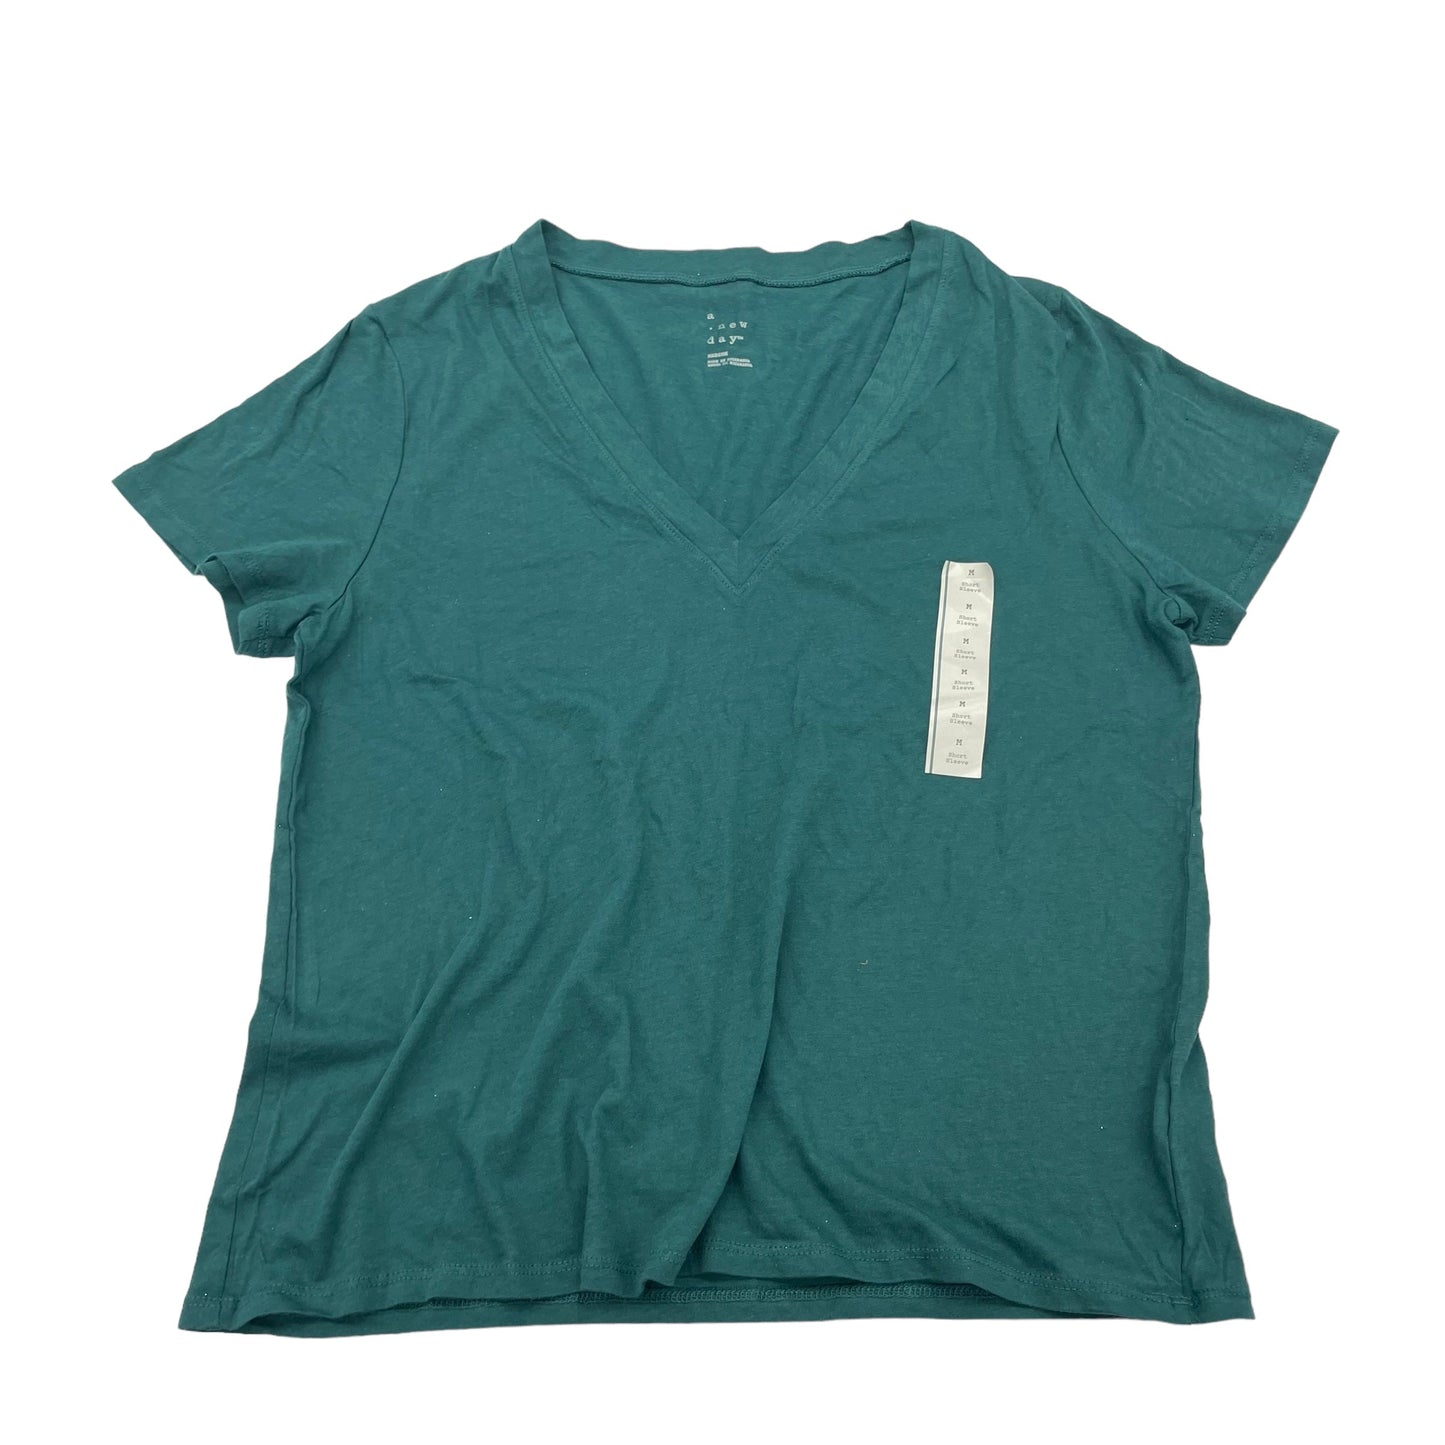 Teal Top Short Sleeve A New Day, Size M